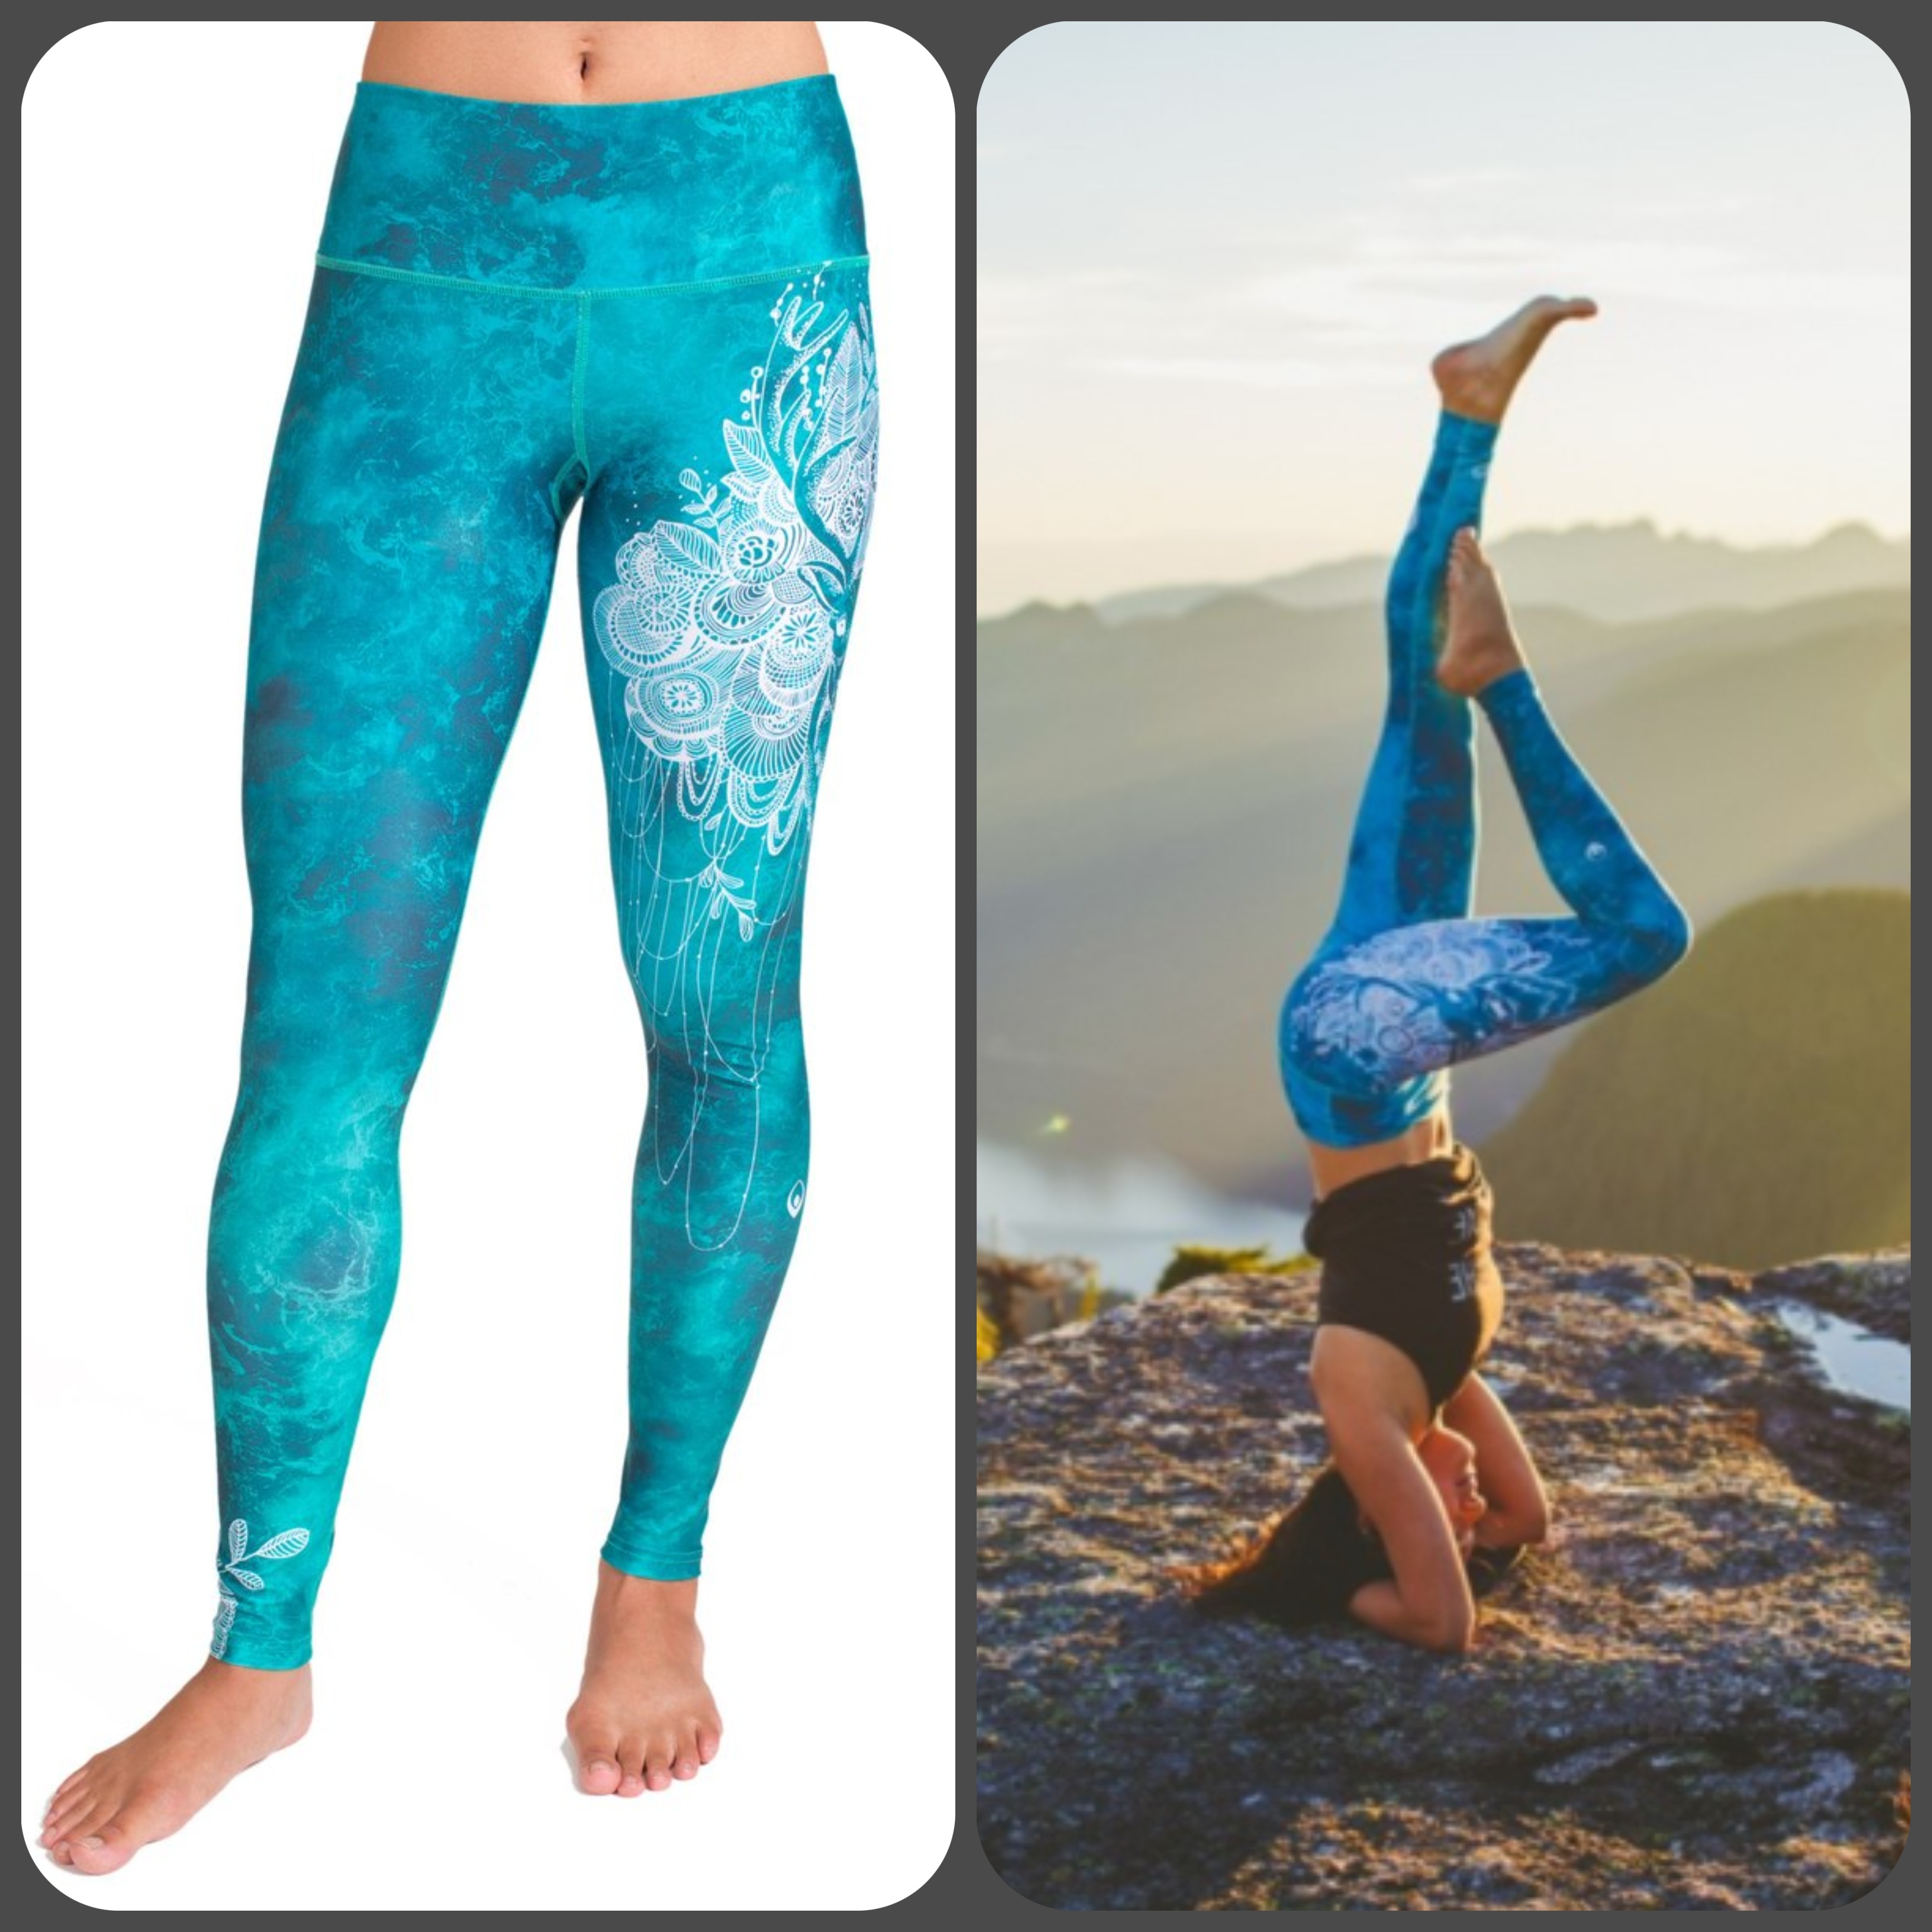 INNER FIRE yoga gear looks good and feels great!